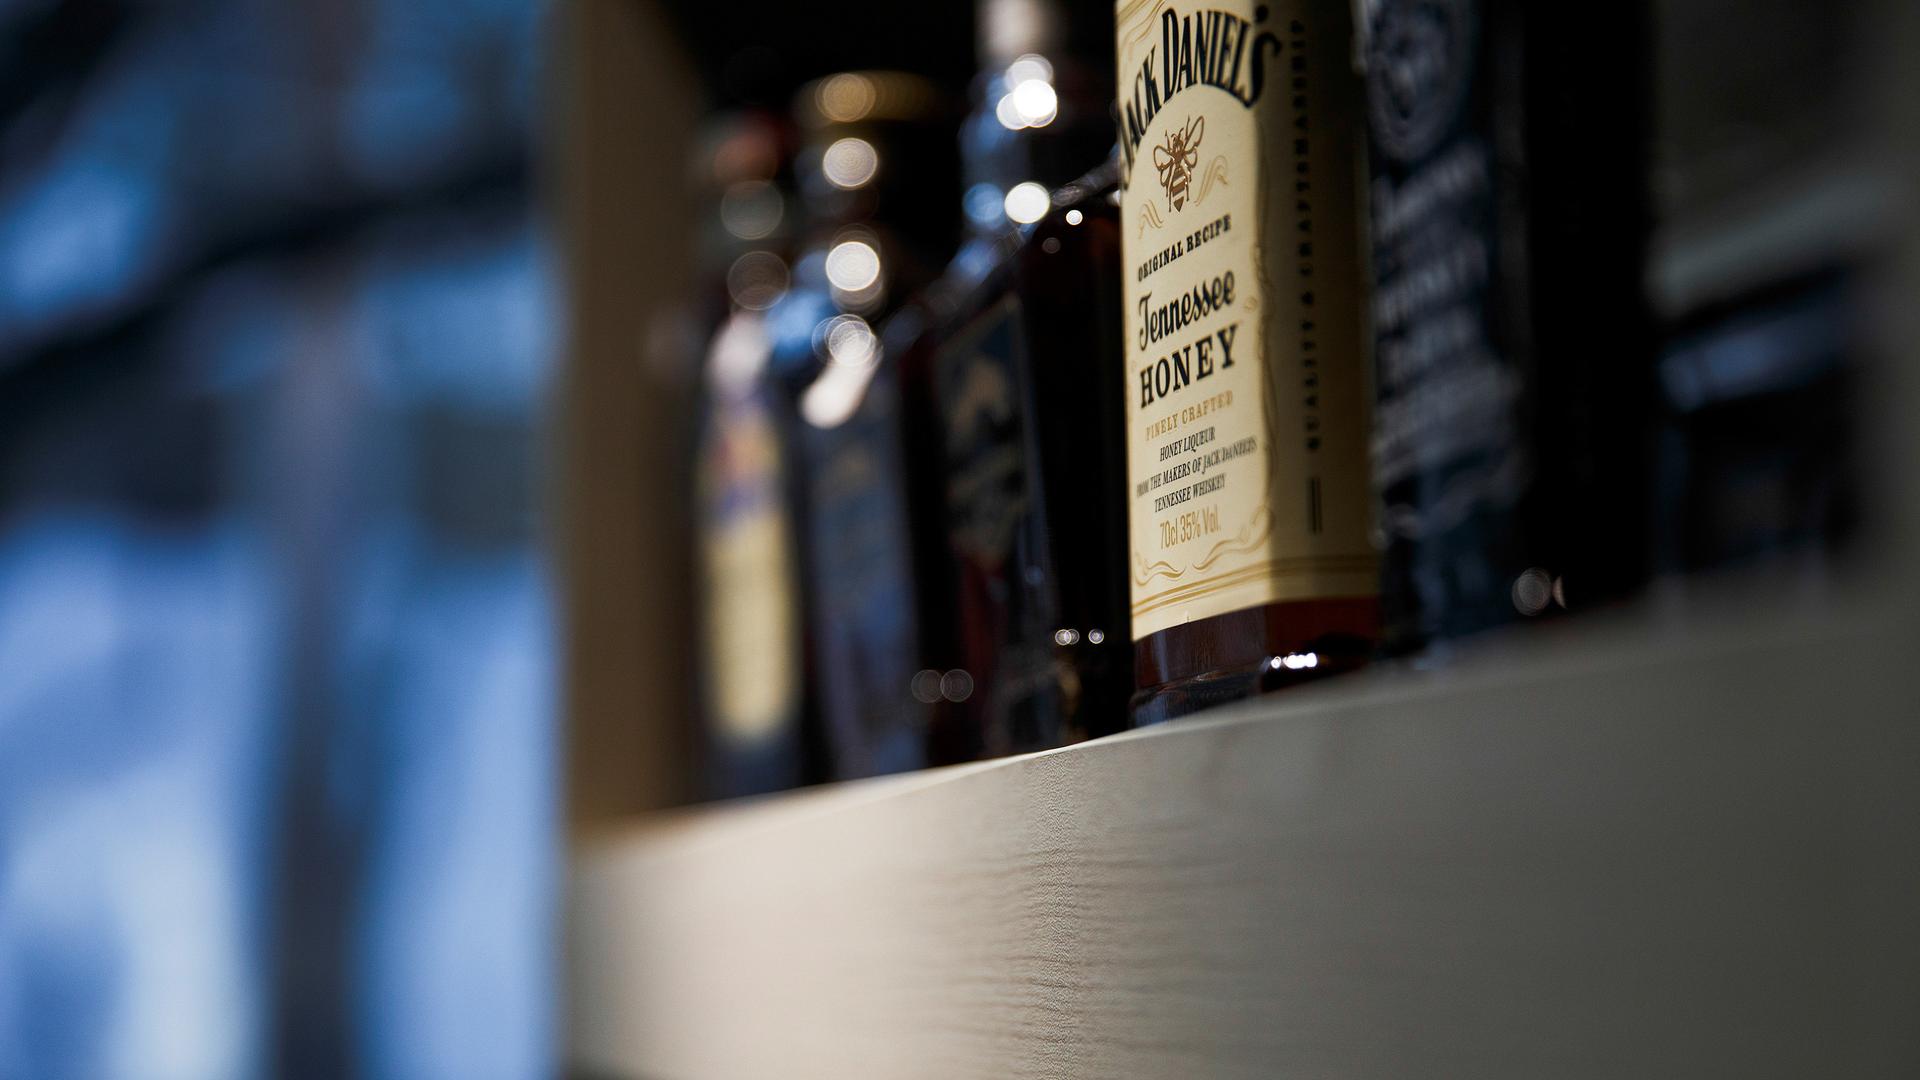 A bottle of Jack Daniel’s Tennessee whiskey in a store in Beijing. China imposed 25 percent tariffs on US whiskeys back in July in response to President Trump’s tariffs. 